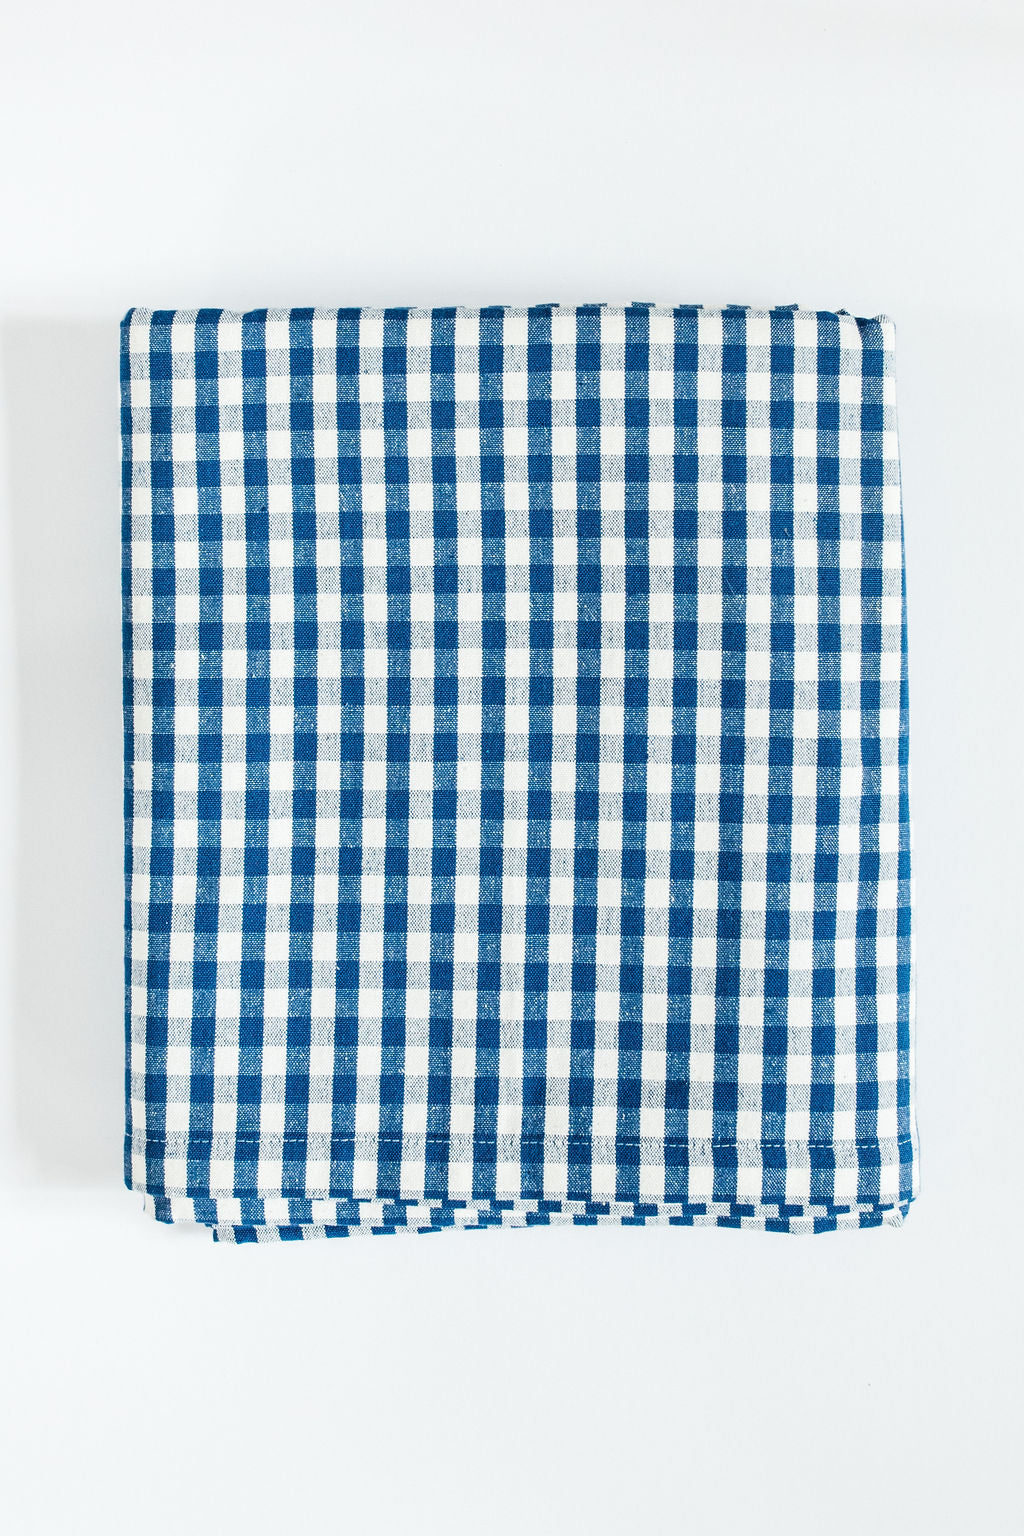 Gingham Check Blue Table Cloth